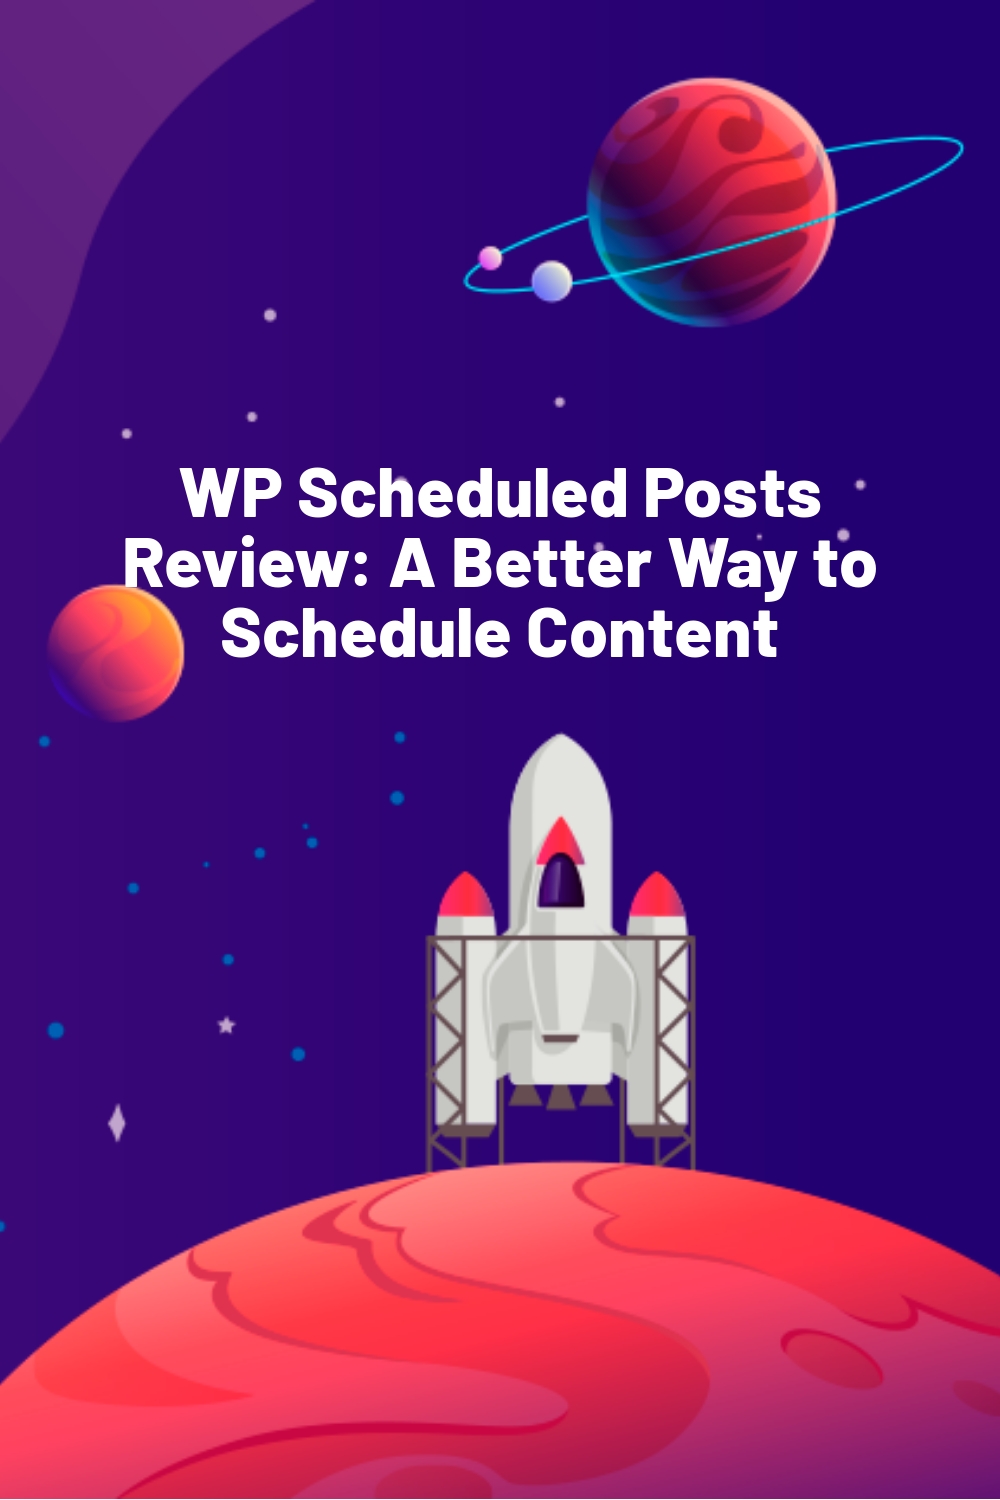 WP Scheduled Posts Review: A Better Way to Schedule Content